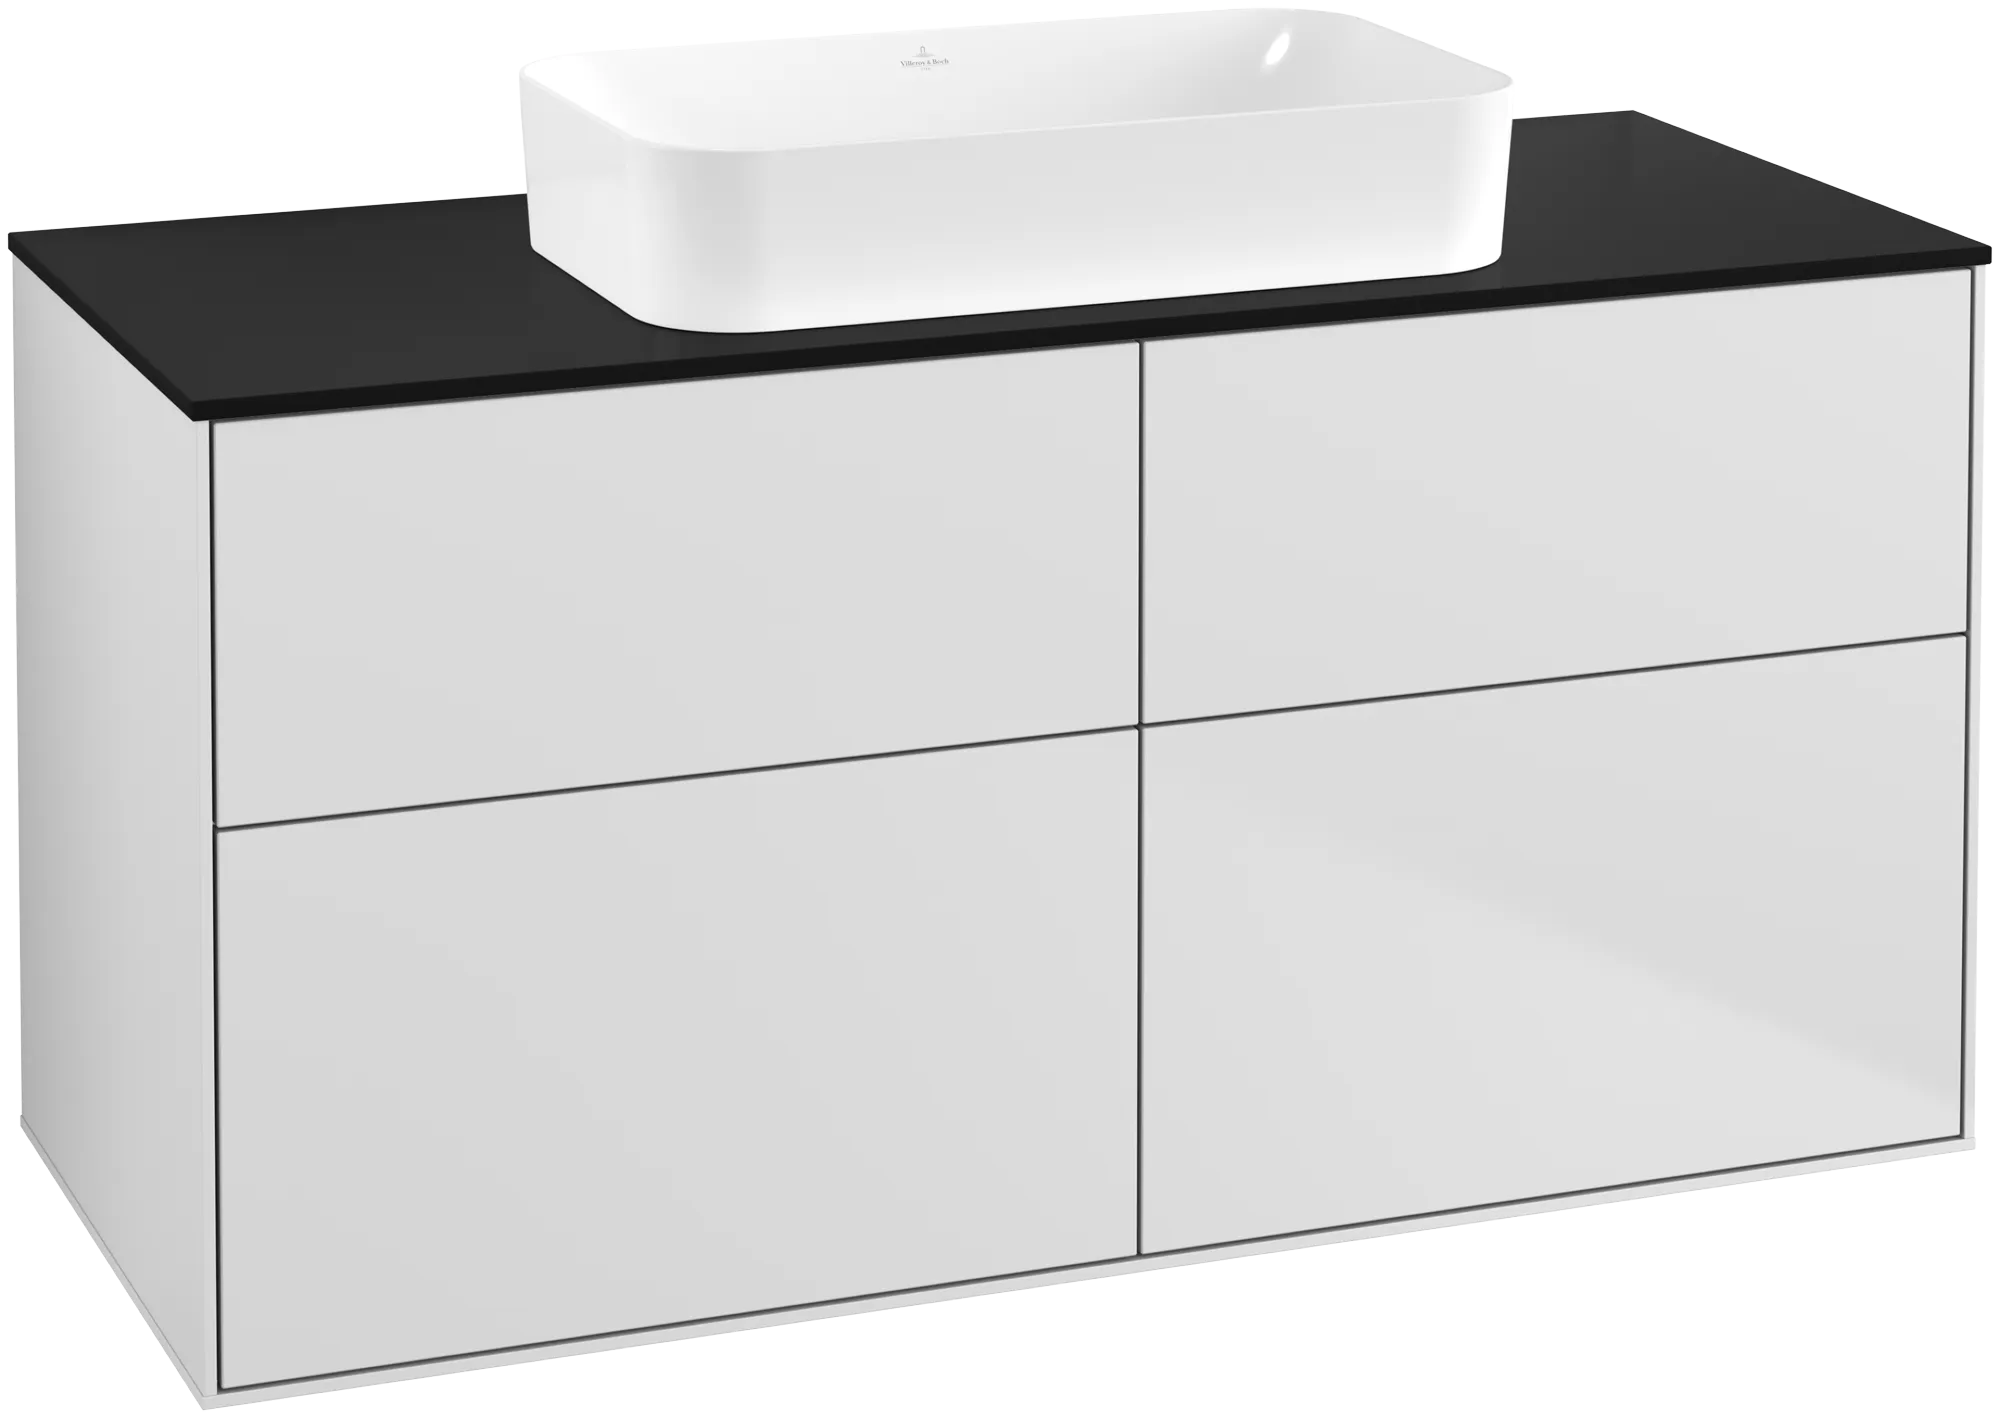 Picture of VILLEROY BOCH Finion Vanity unit, with lighting, 4 pull-out compartments, 1200 x 603 x 501 mm, White Matt Lacquer / Glass Black Matt #G67200MT